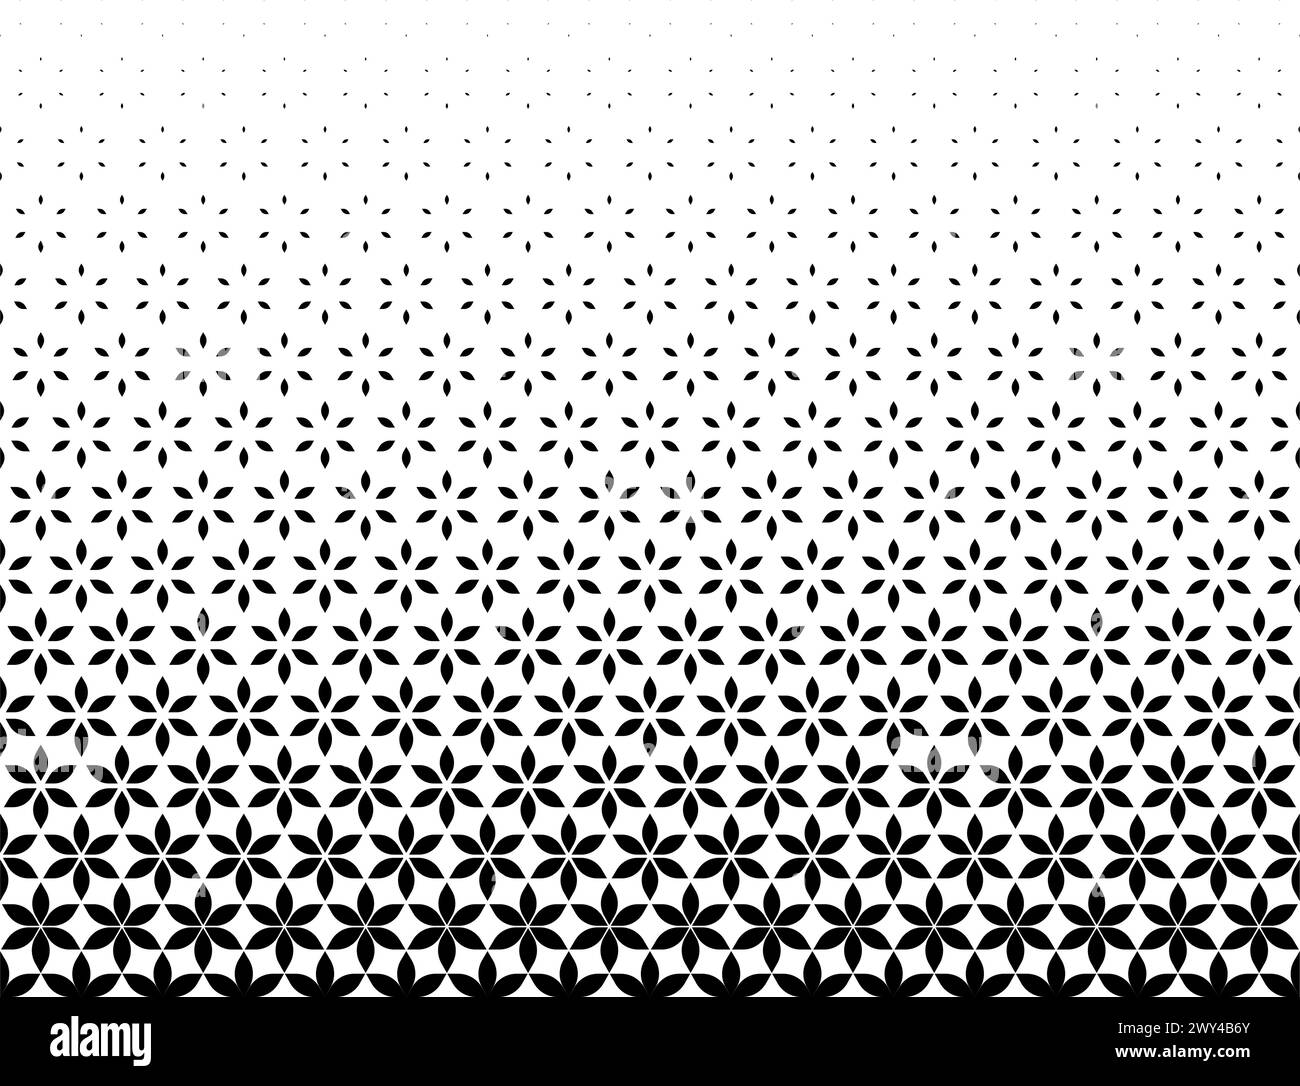 Geometric pattern of black figures on a white background.Seamless in one direction.Option with a Average fade out.Ray method.Two rounded corners Stock Vector